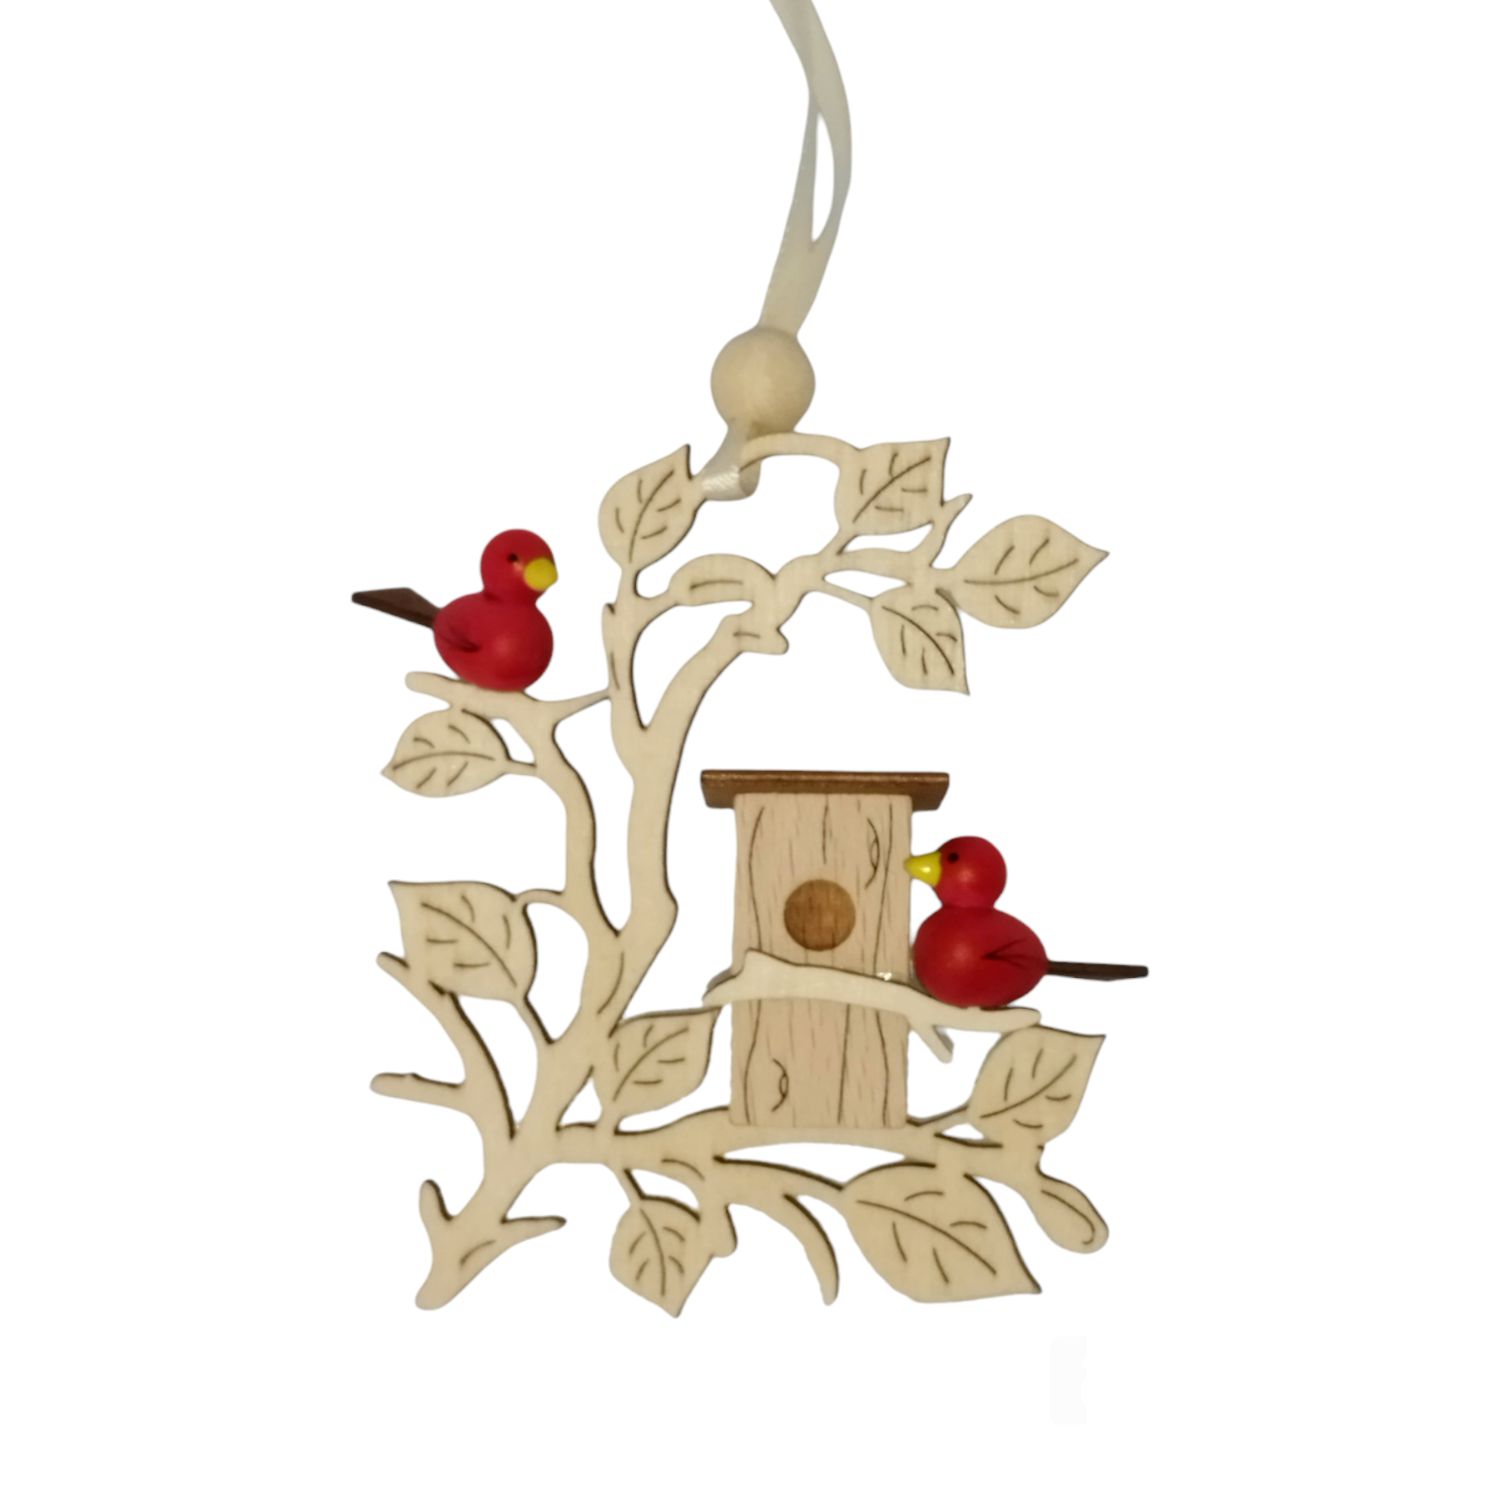 Tree hanging birds in the nesting box, red